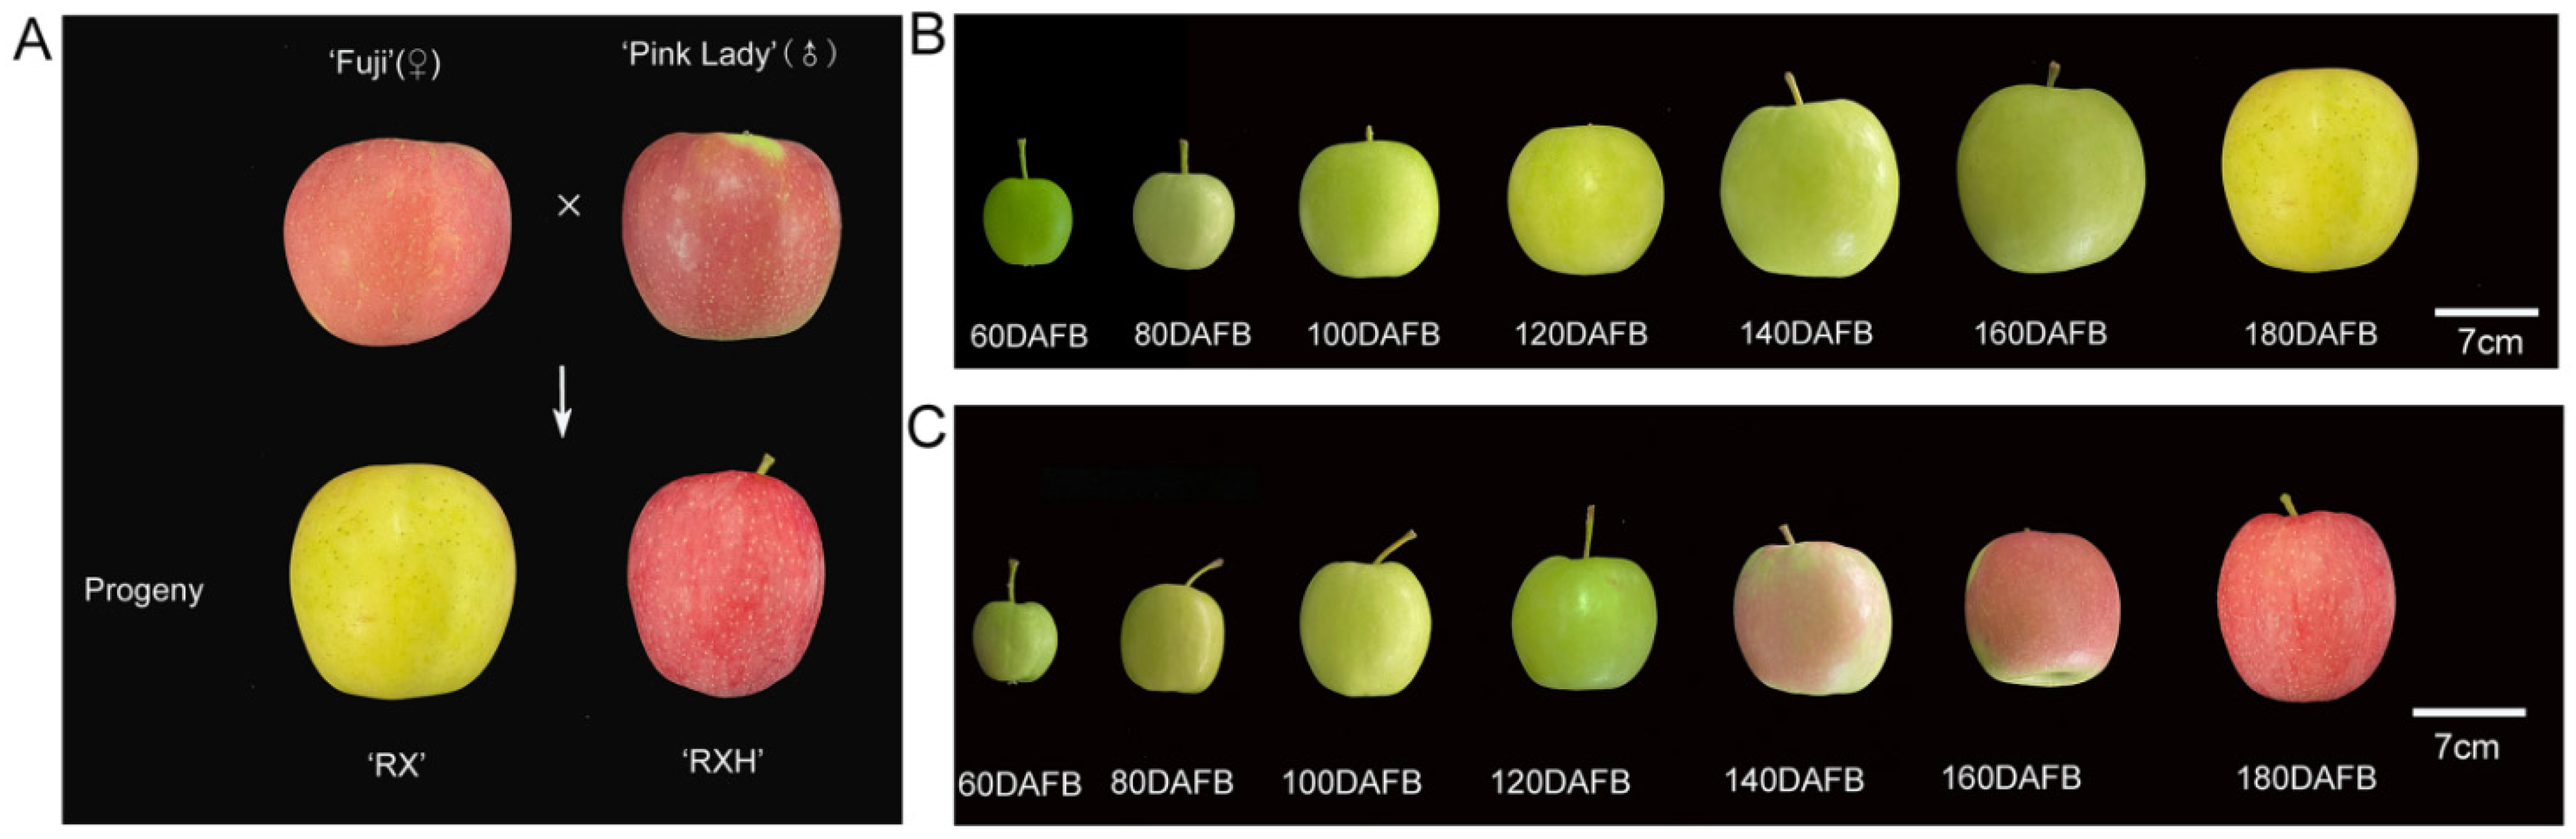 Fruit growth of the three phenotypically different apple varieties. a